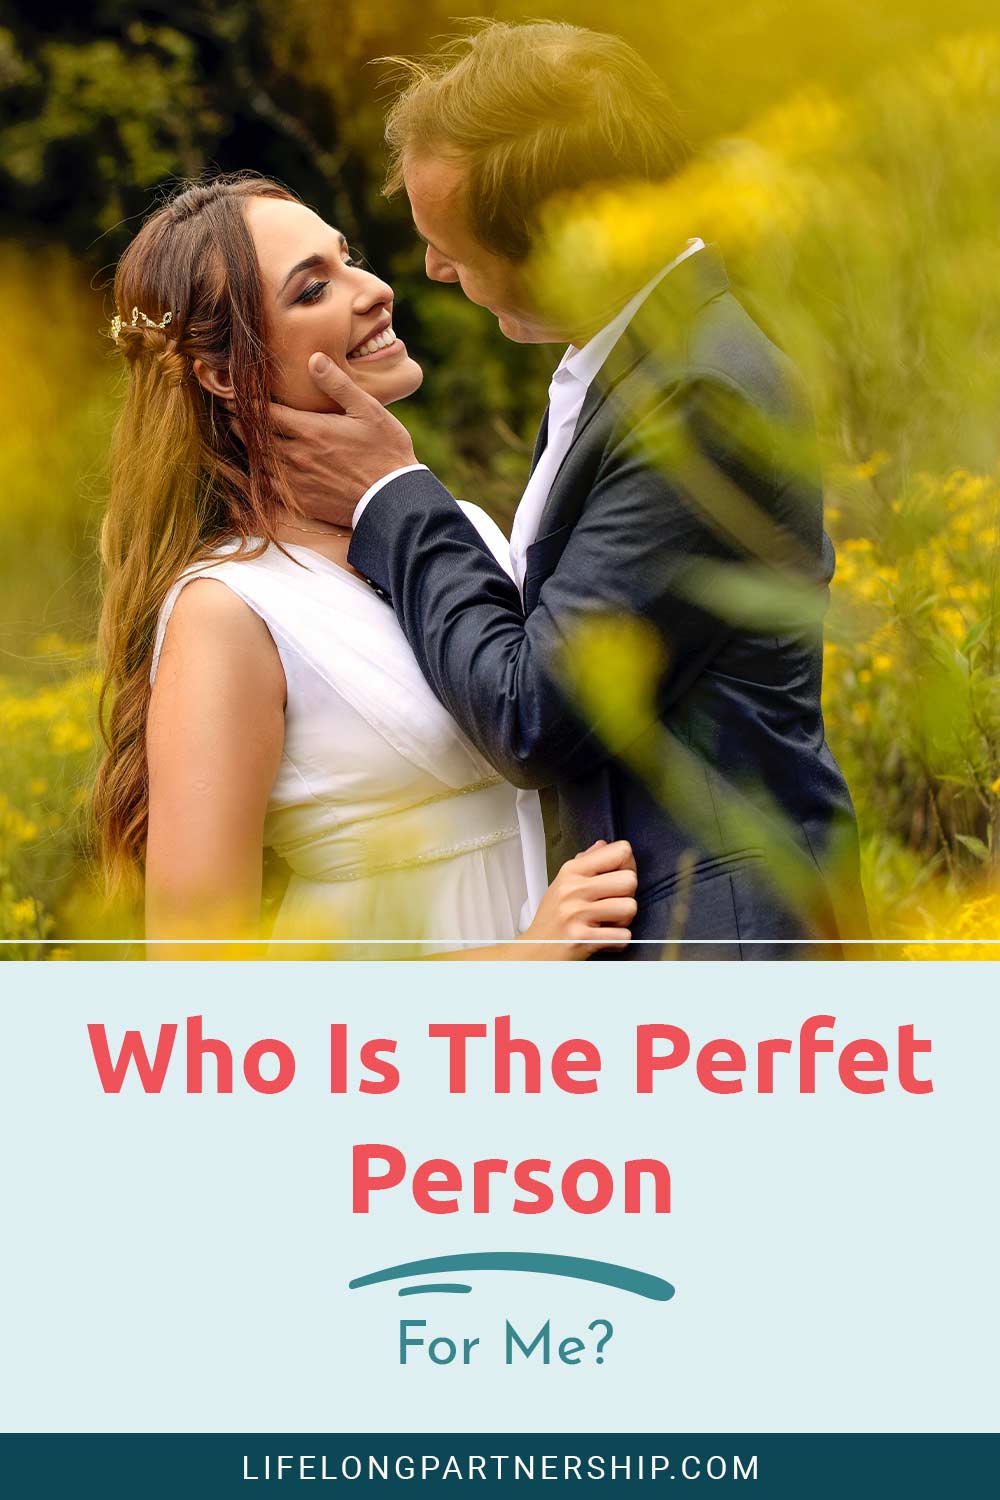 Man and woman close to each other smiling - Who Is The Perfet Person For Me?